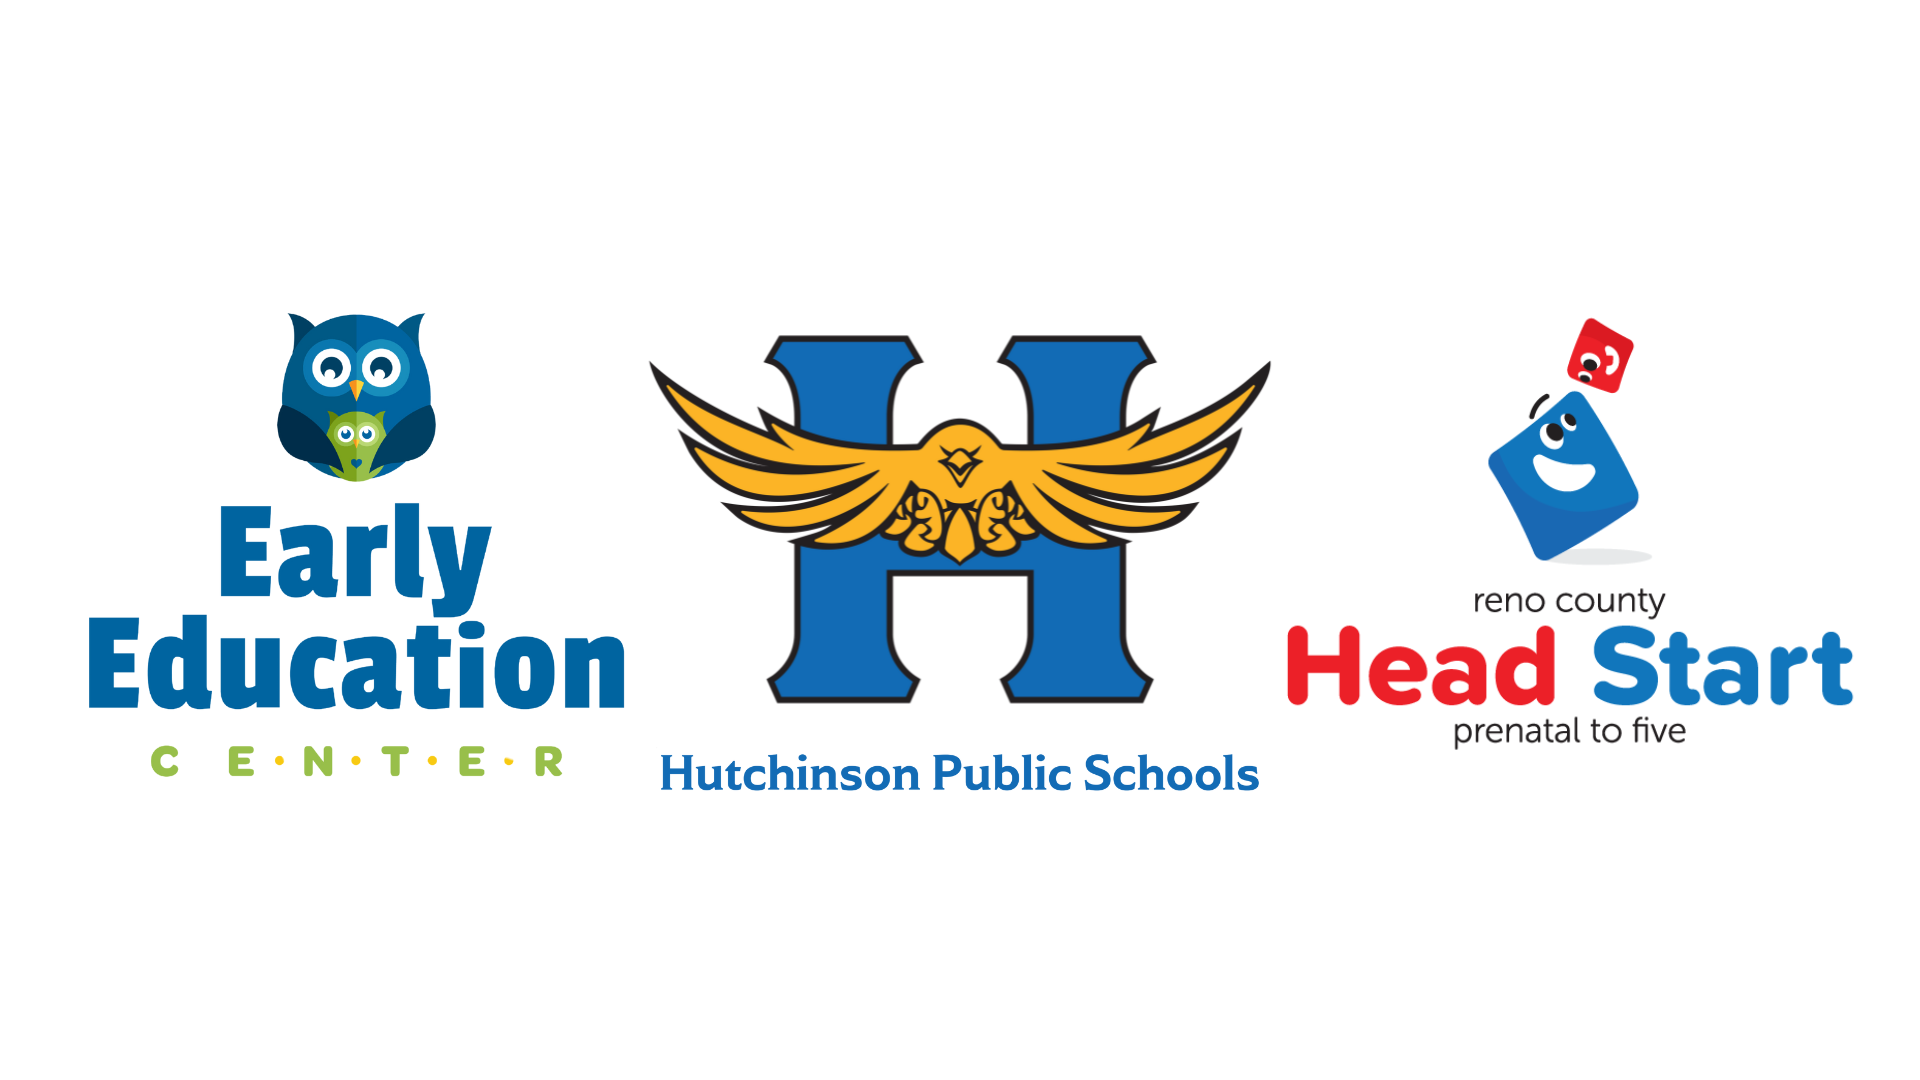 early childhood education logos- early education center, hutchinson public schools,  reno county head start prenatal to five